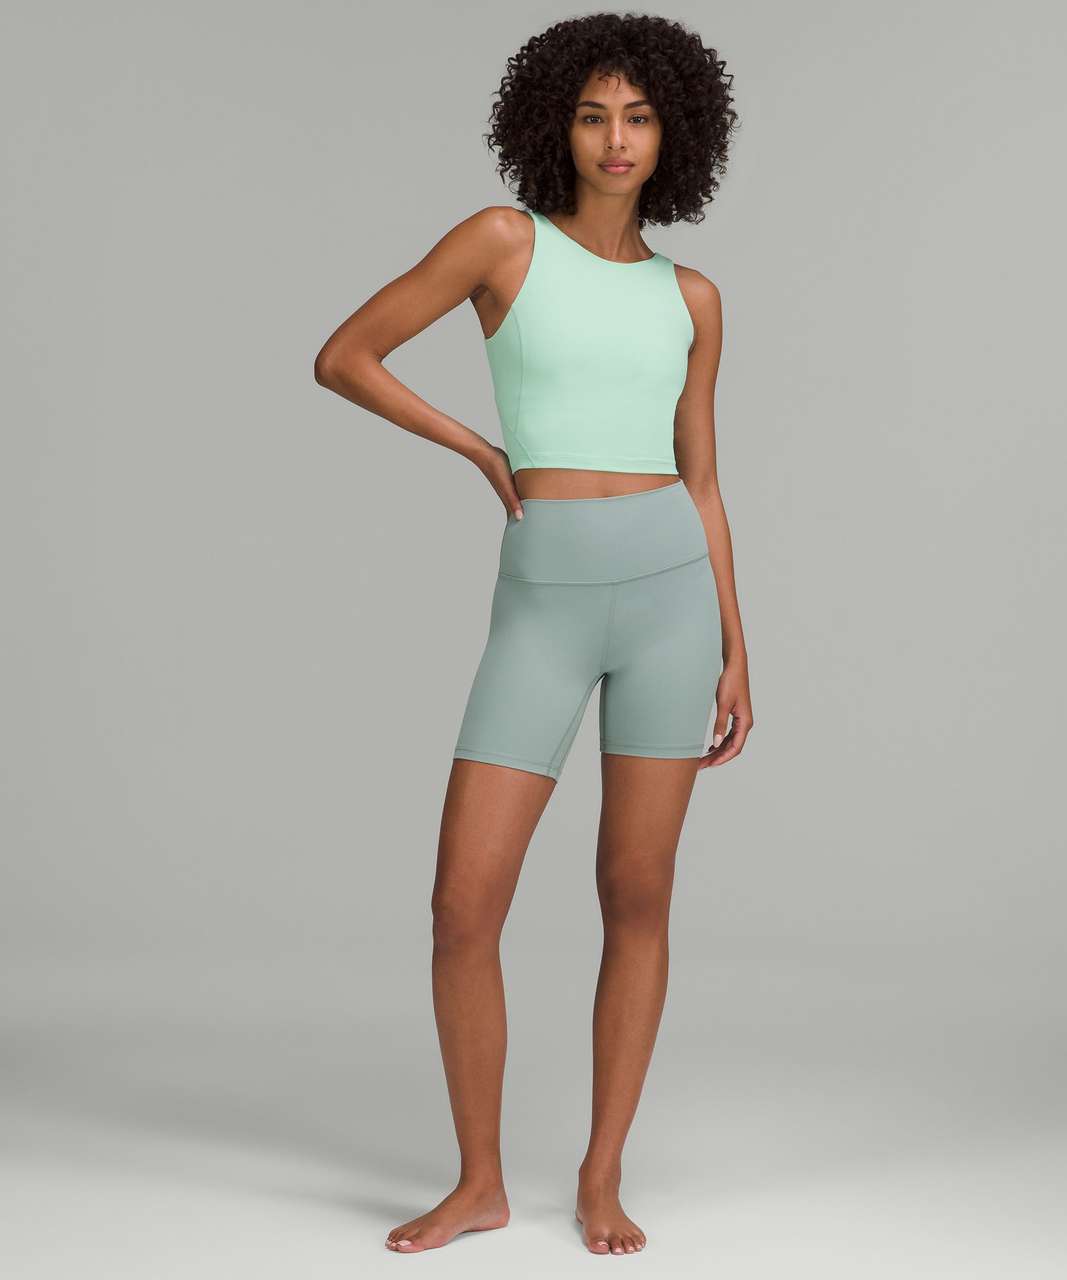 NWT Lululemon Align Tank Cropped Size 6 Wild Mint Green - Soft Nulu Yoga Top  NEW